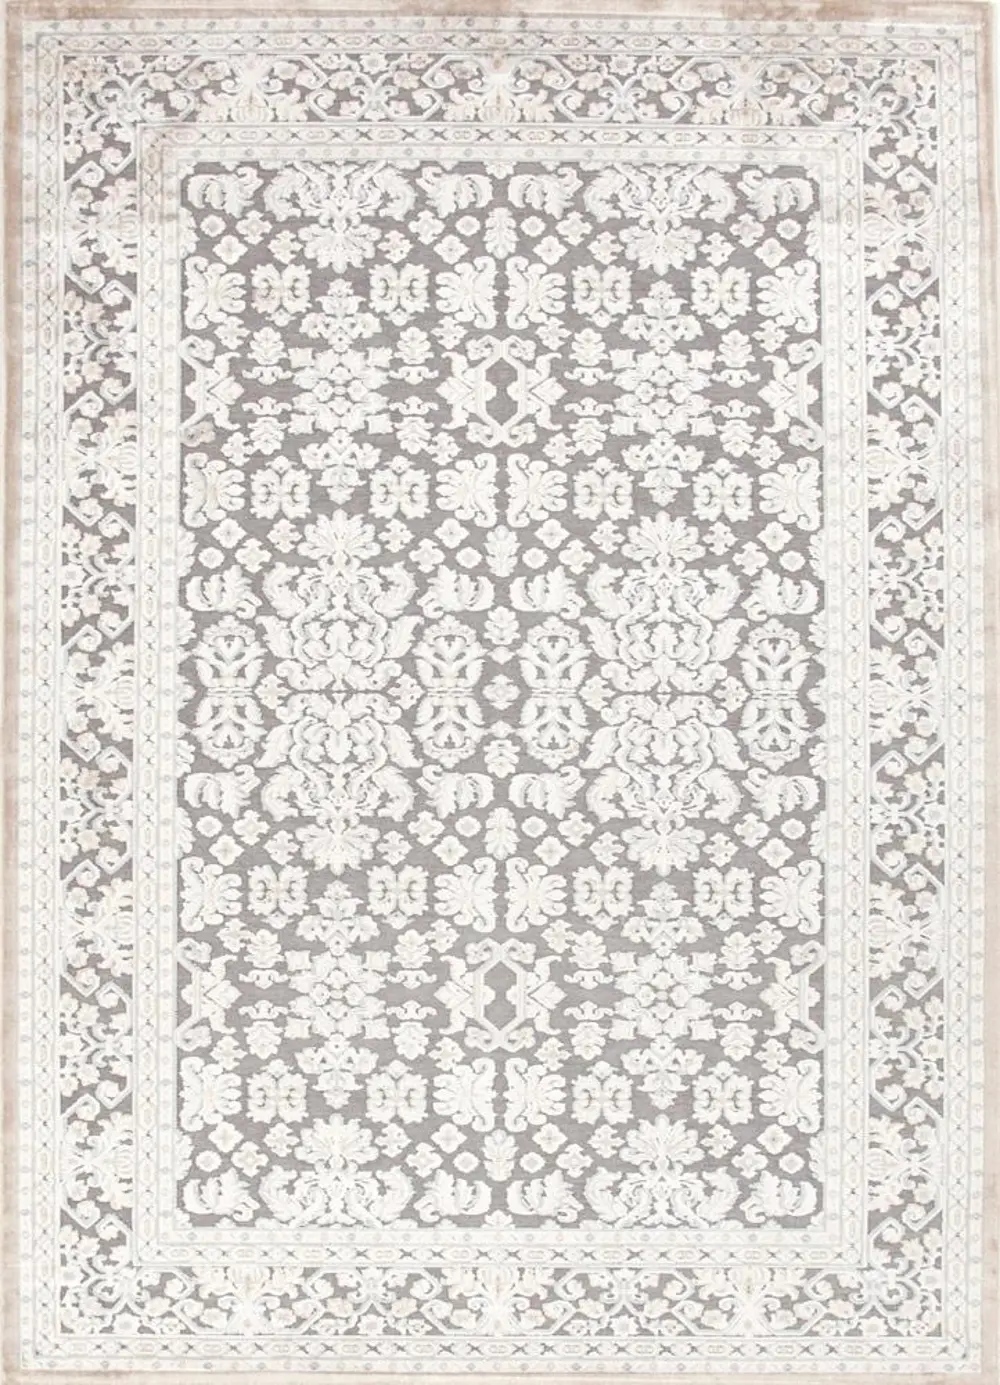 8 x 10 Large Transitional Gray Area Rug - Fables-1